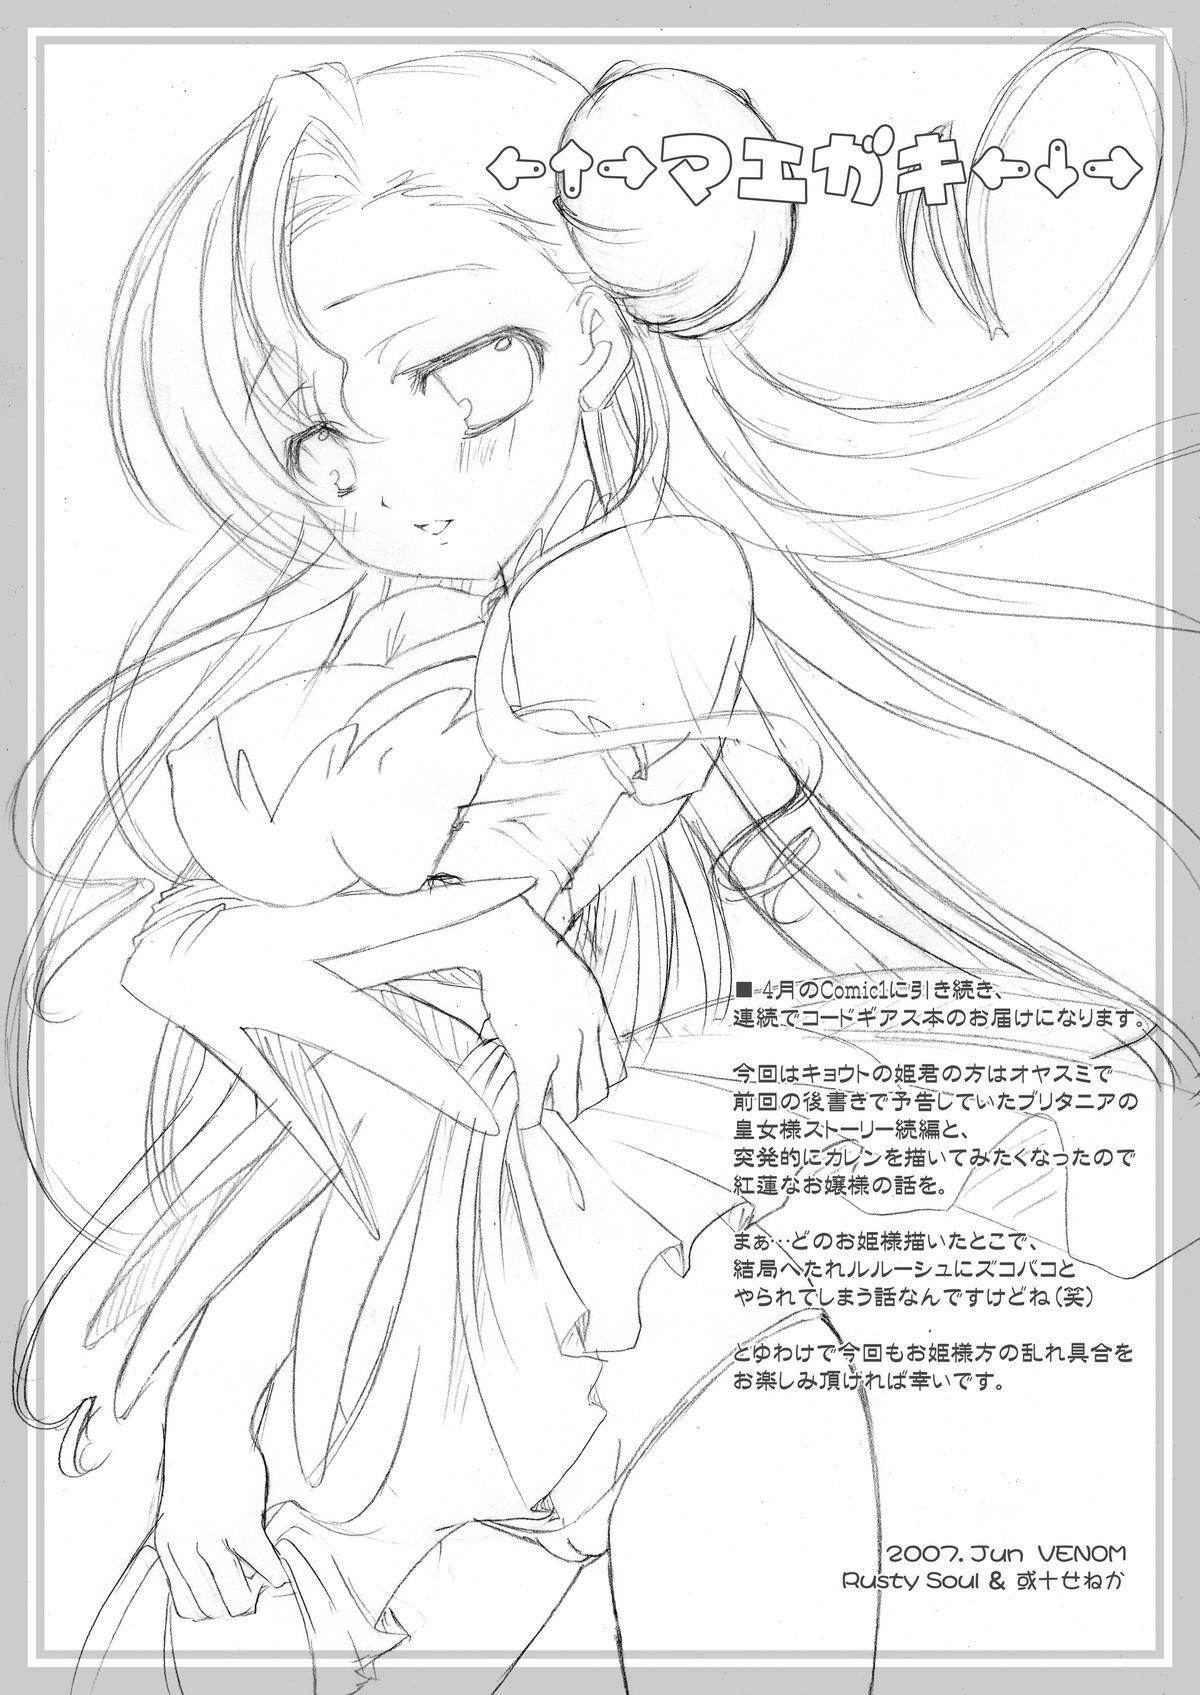 Ametuer Porn Kouhime Benihime - Code geass Pervert - Page 4